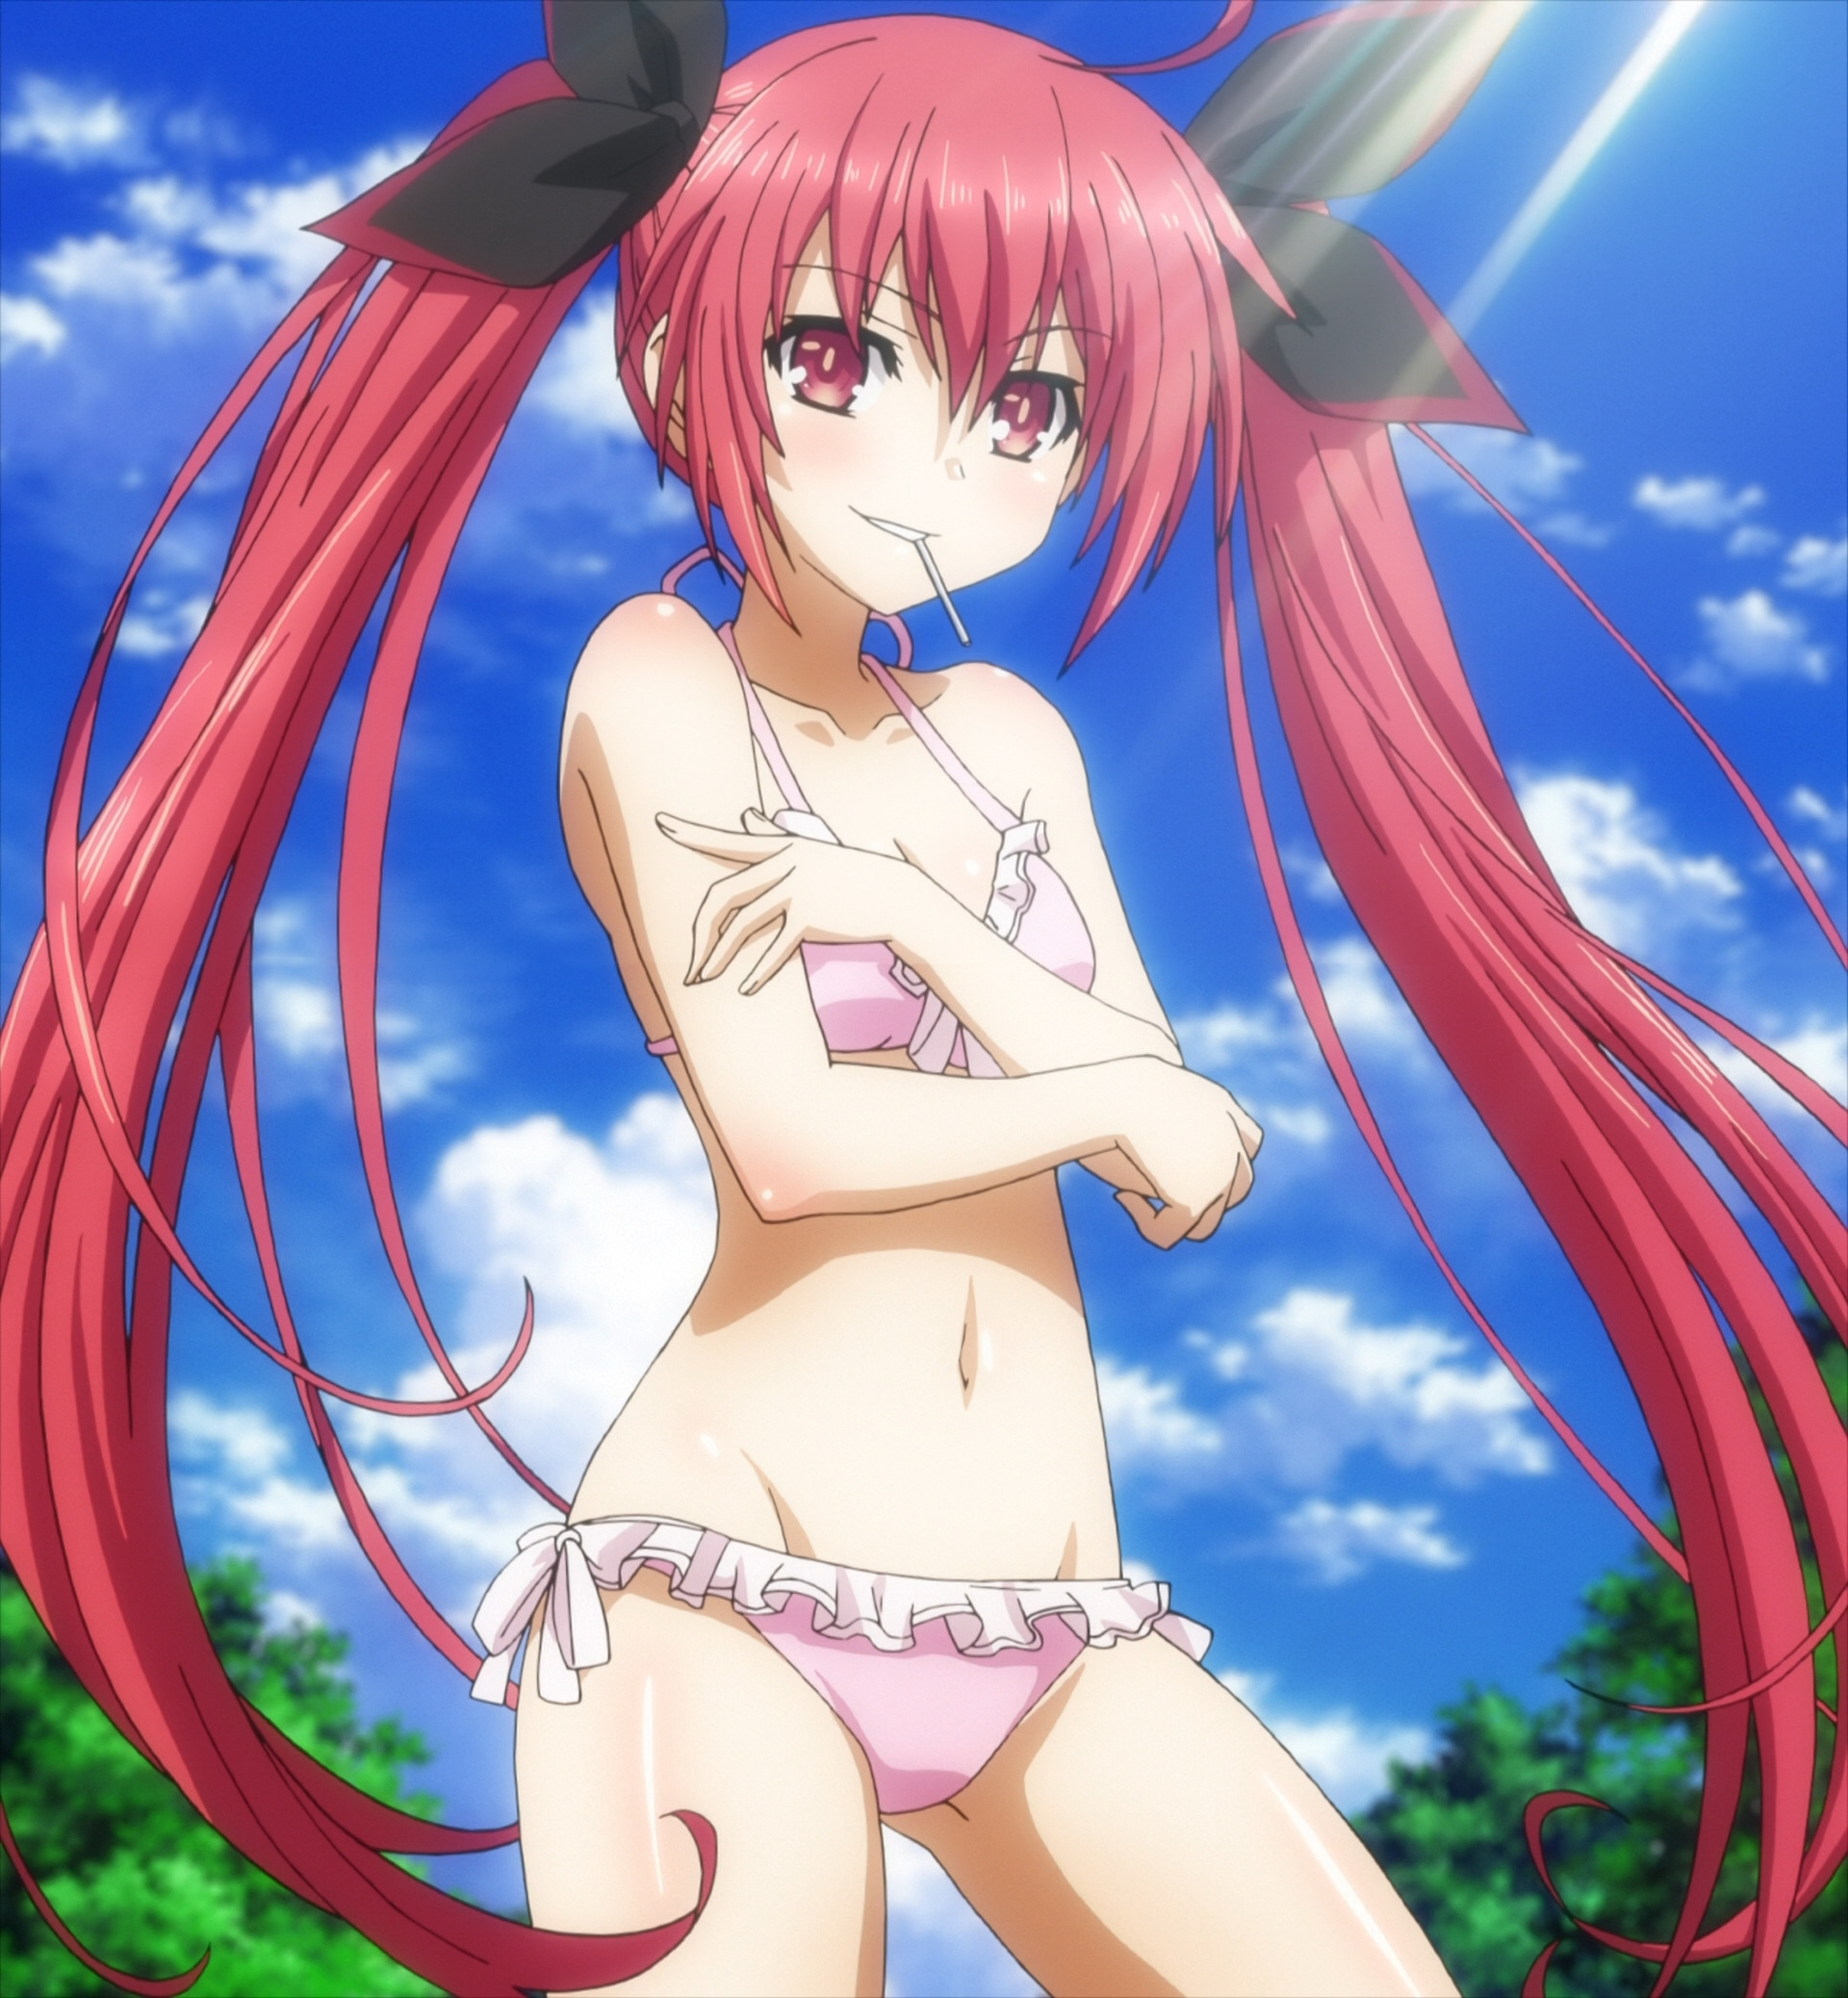 The date with Kotori started off rough, but Shido’s bold move saved it. 